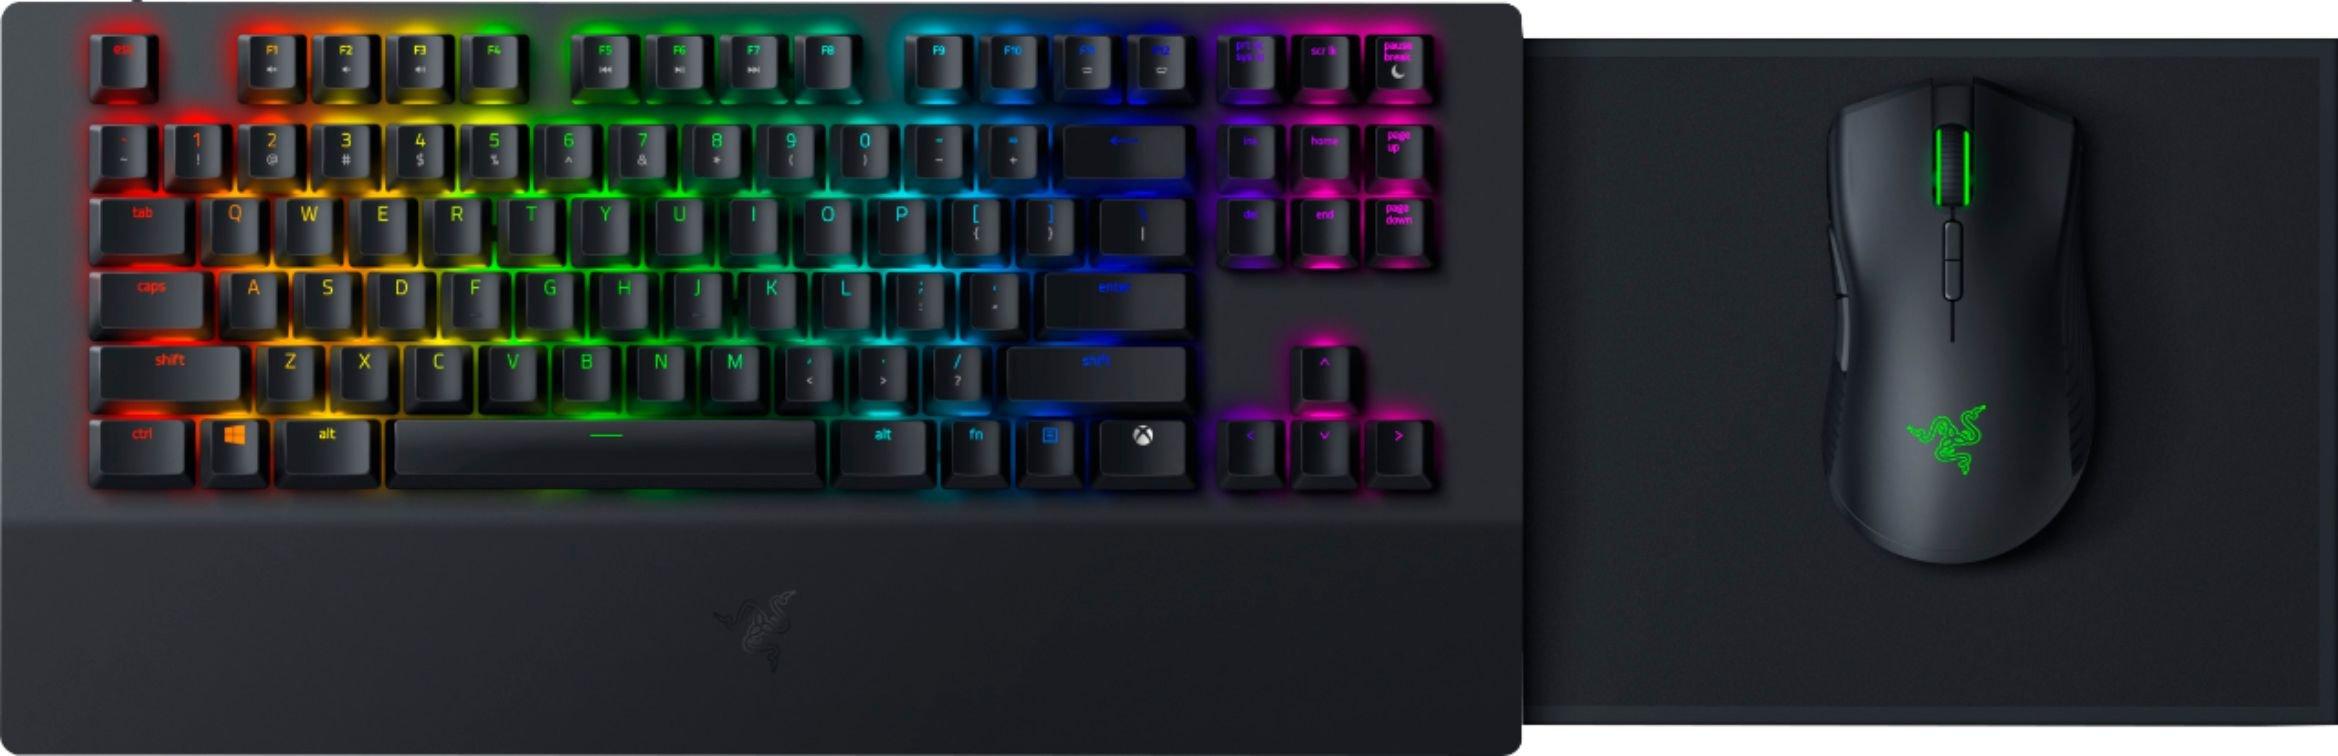 Xbox One gets its own keyboard and mouse: First look at Razer's new  peripheral for Microsoft console – GeekWire